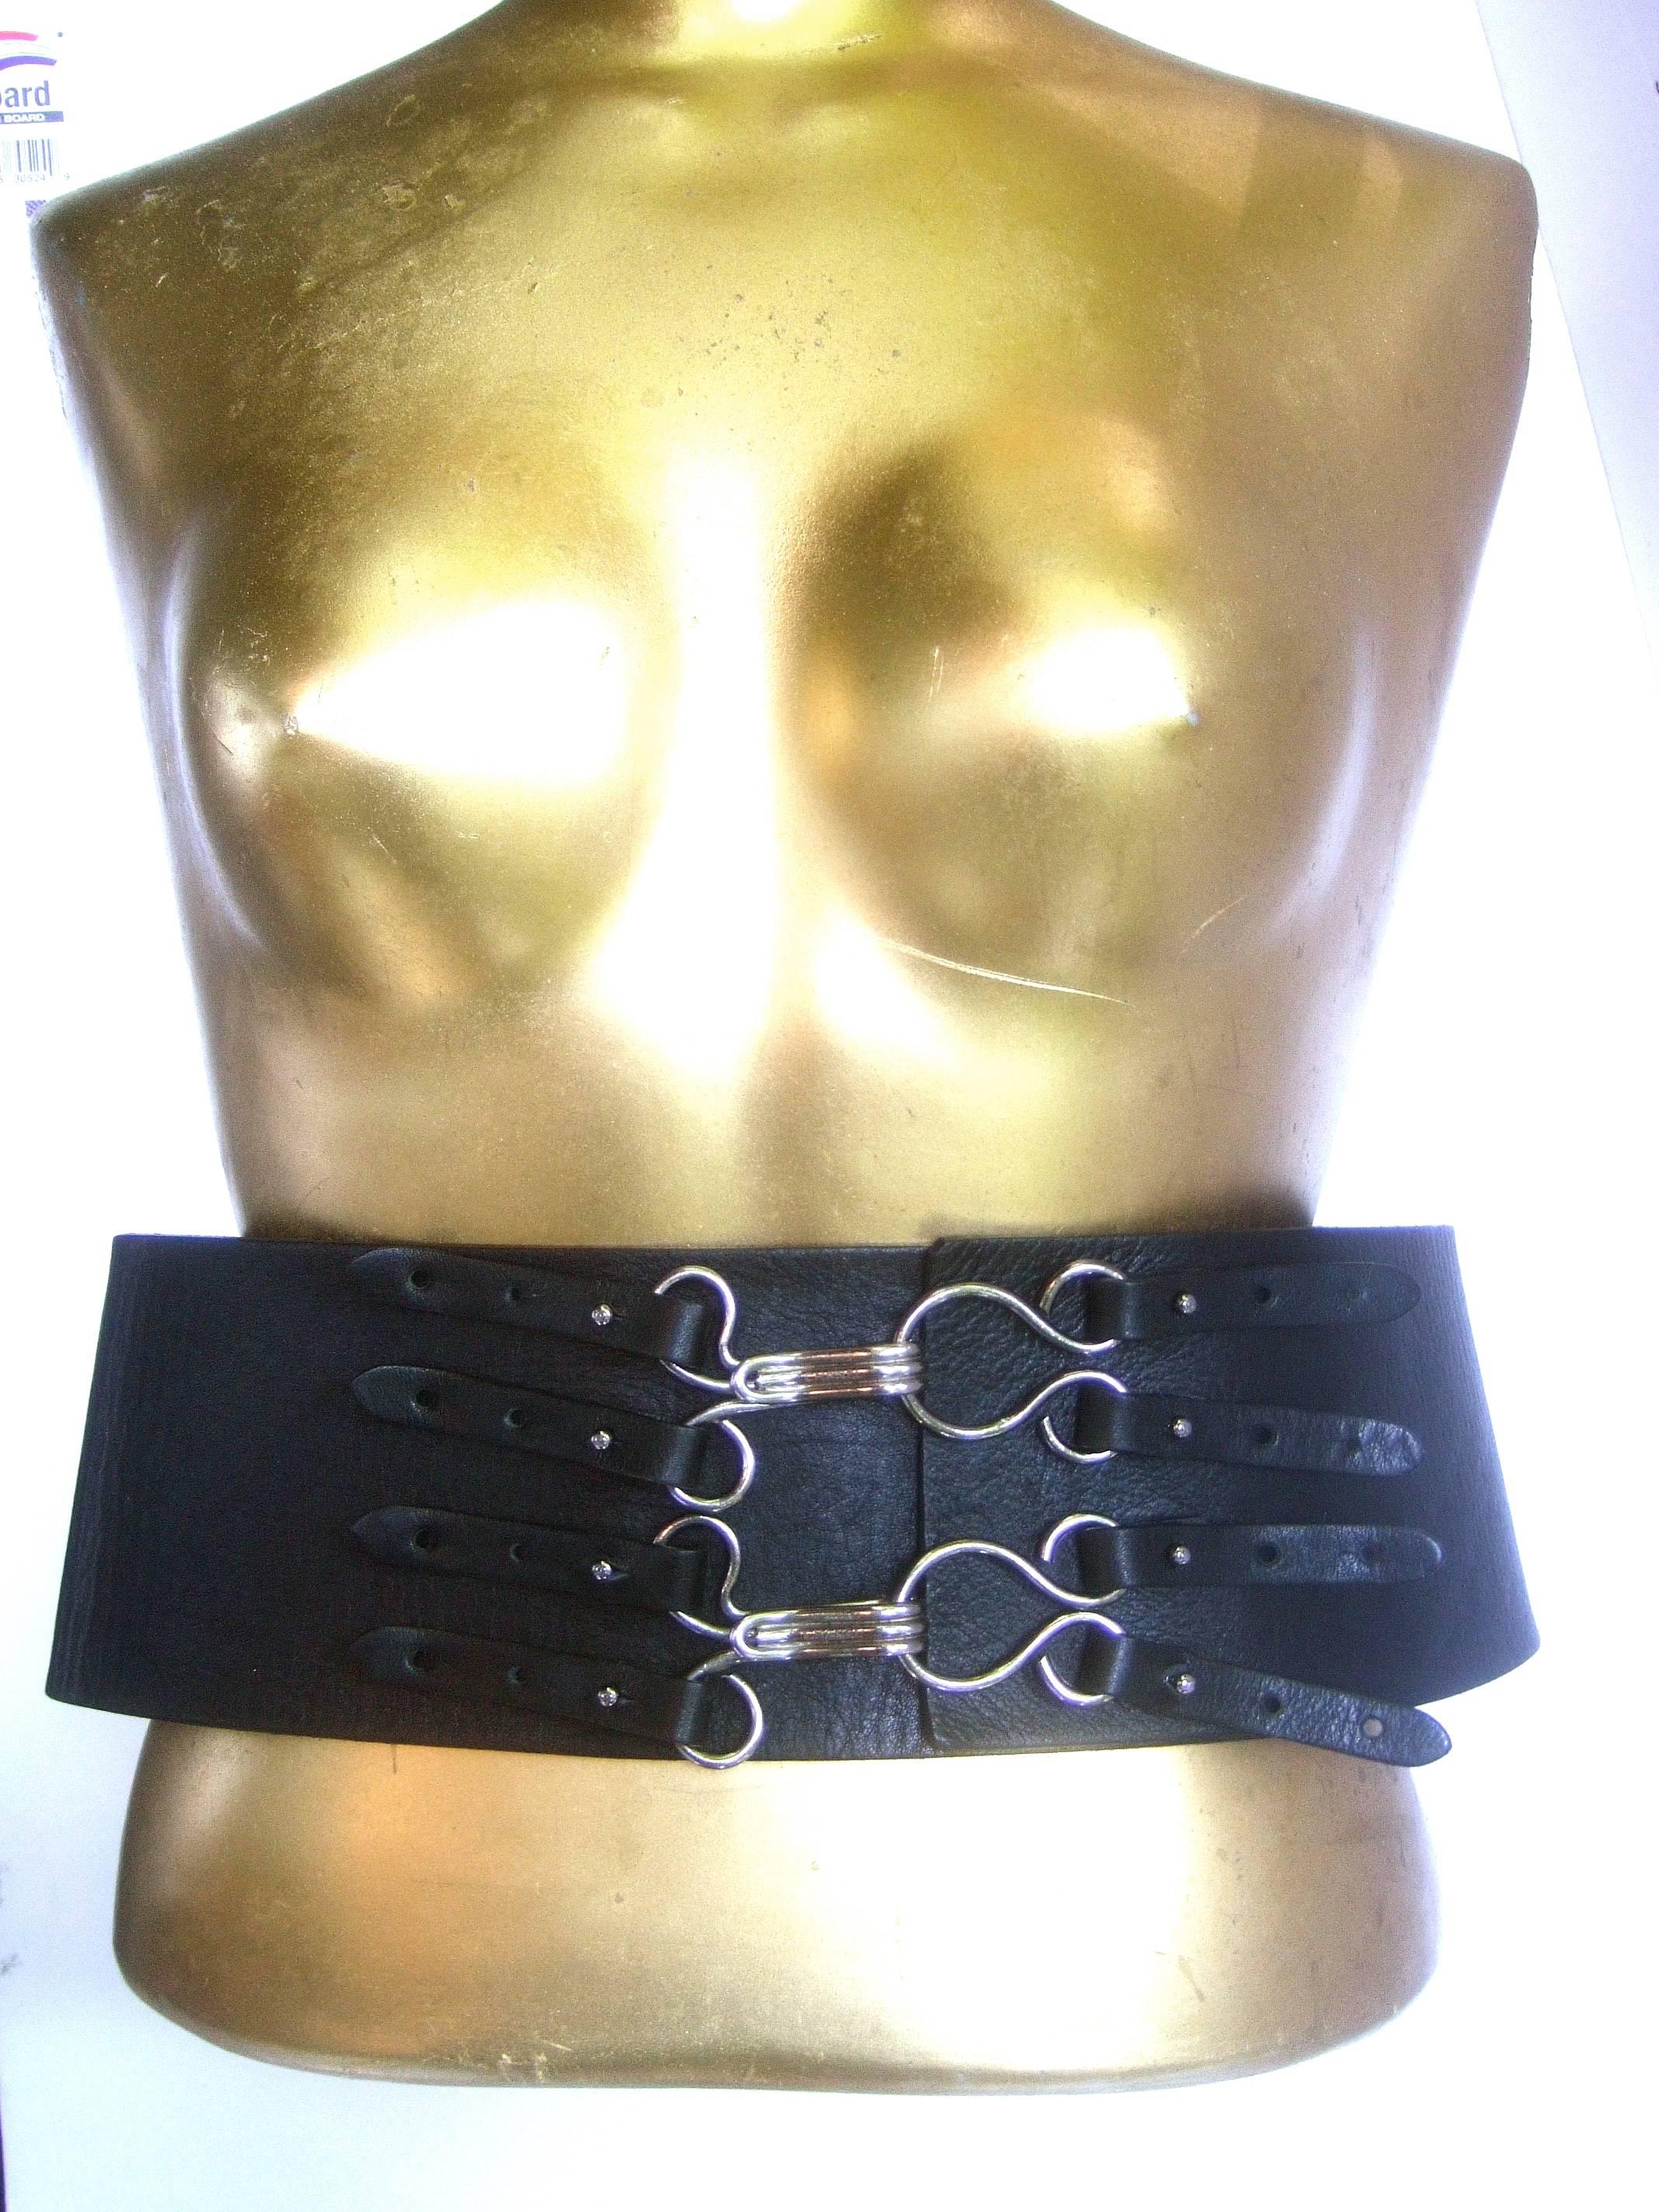 Chanel Bold Wide Black Leather Belt in Chanel Box c 1990s 2